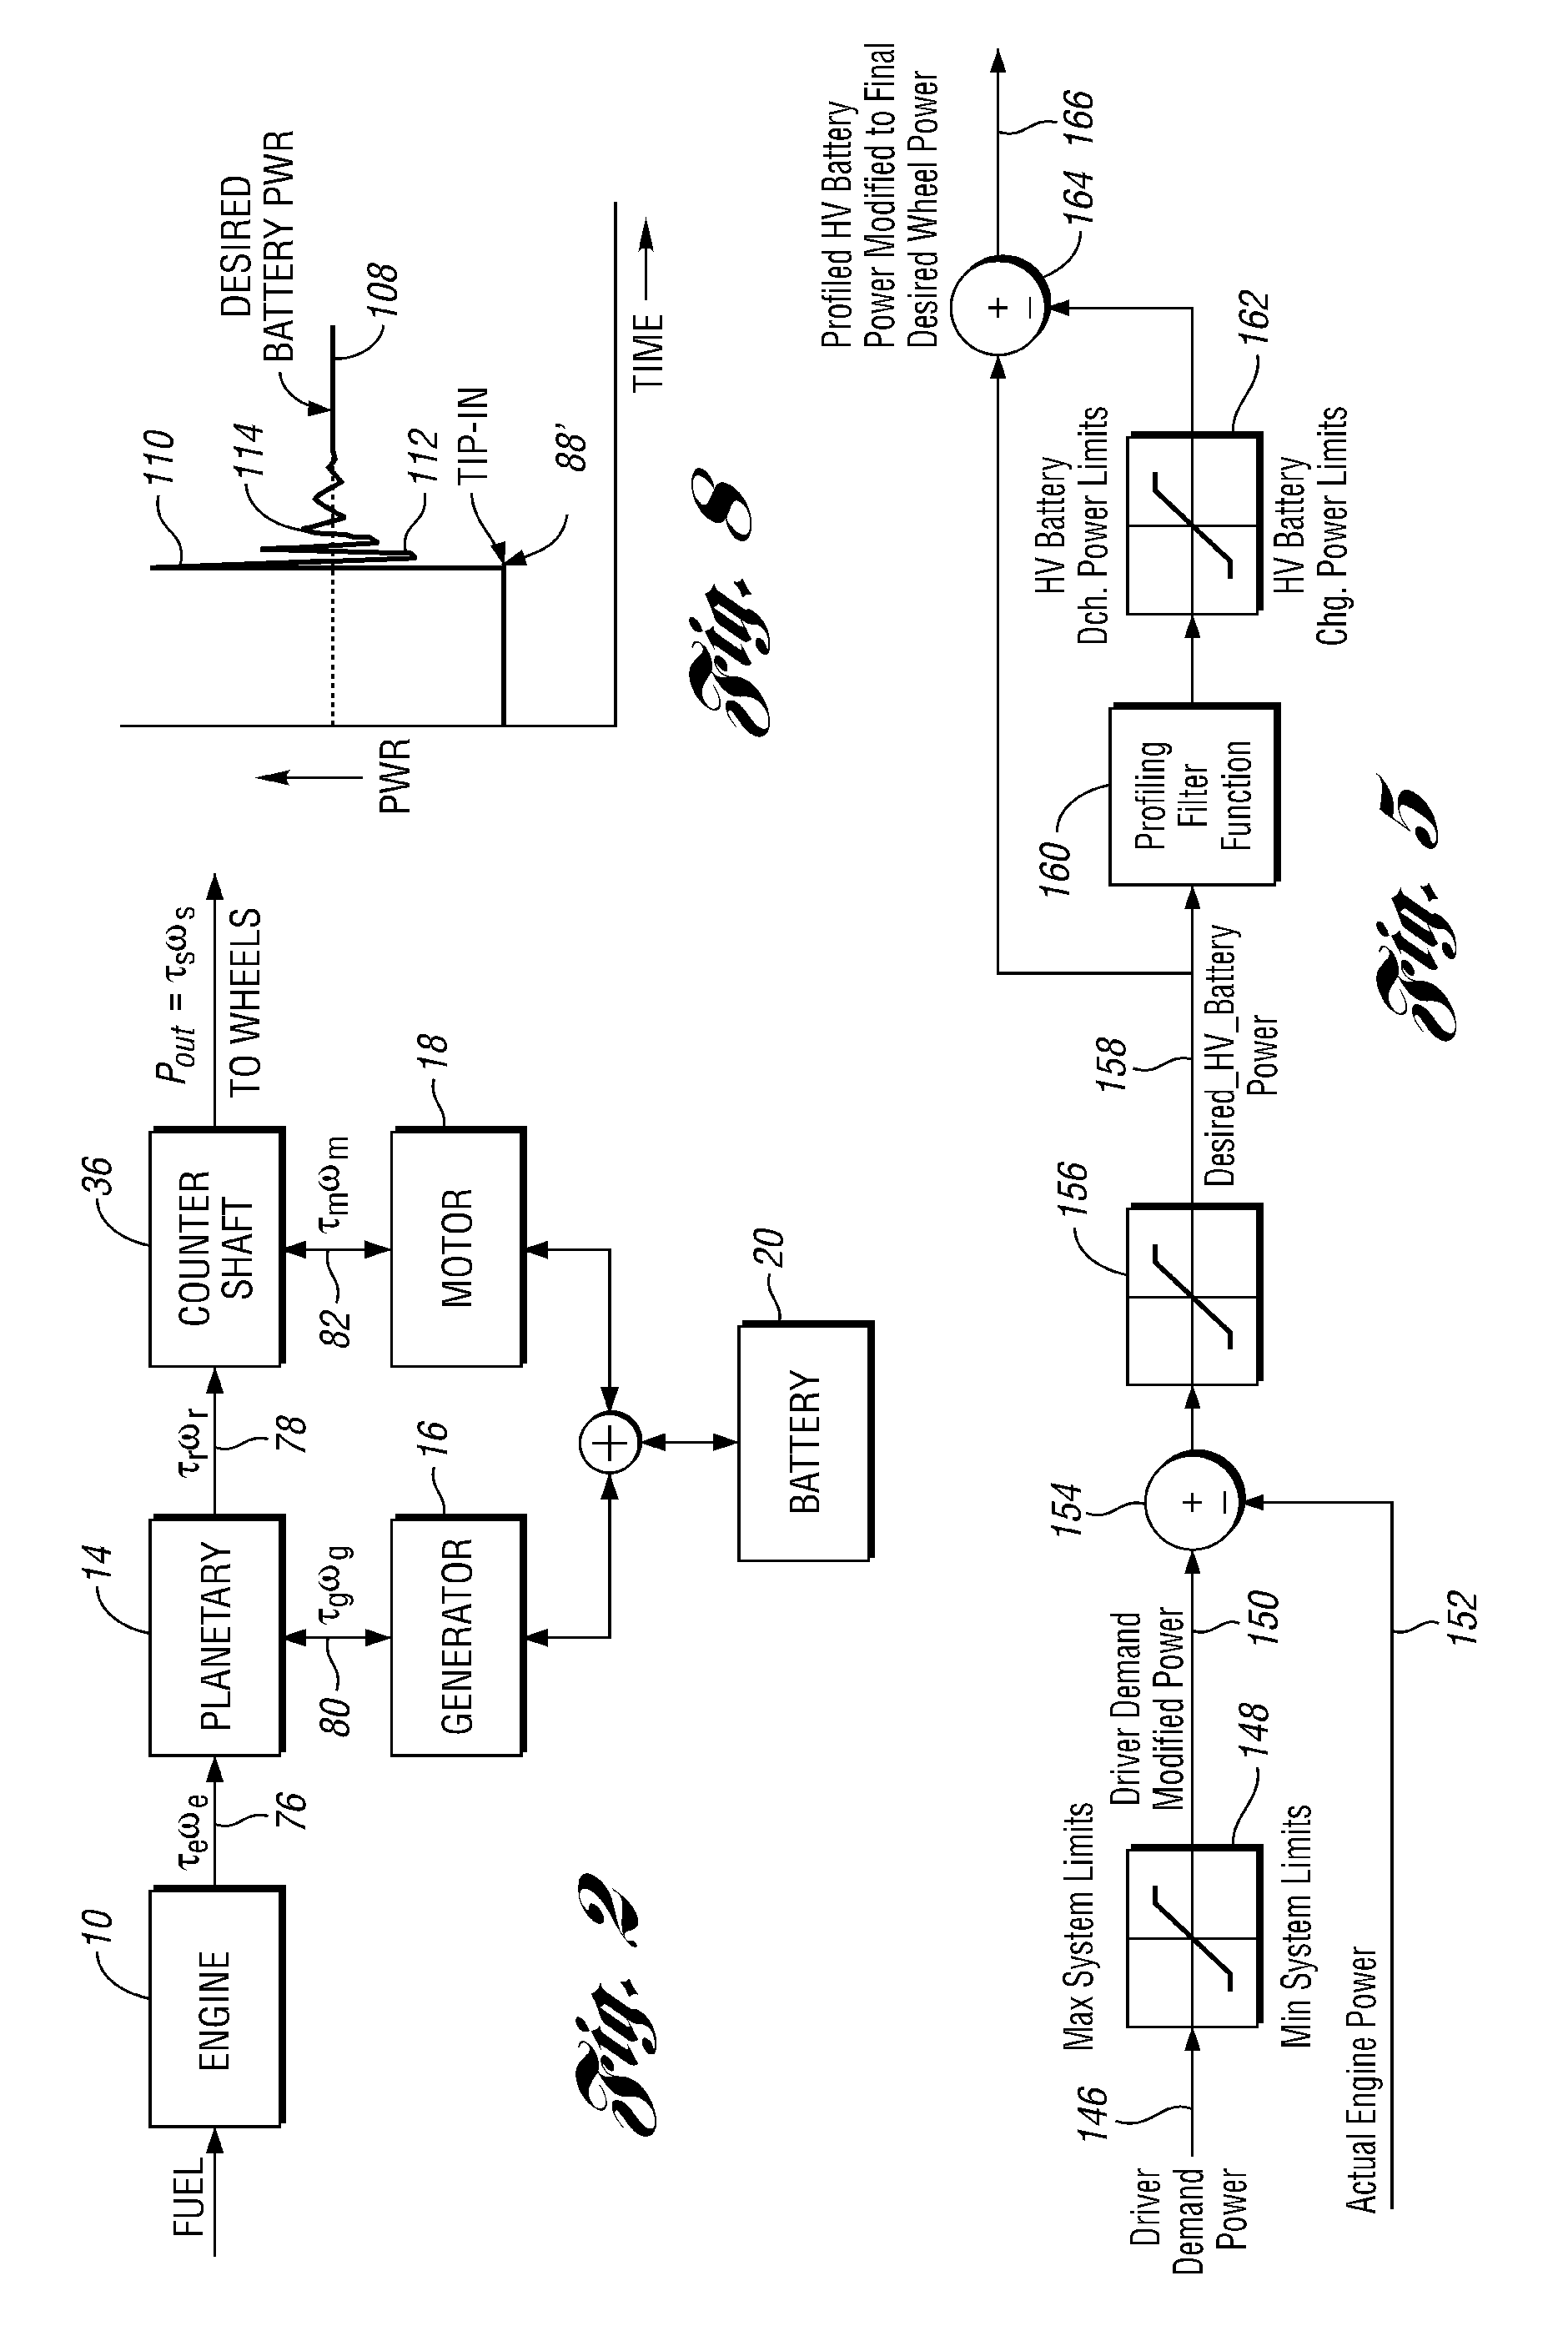 Method and system for determining final desired wheel power in a hybrid electric vehicle powertrain